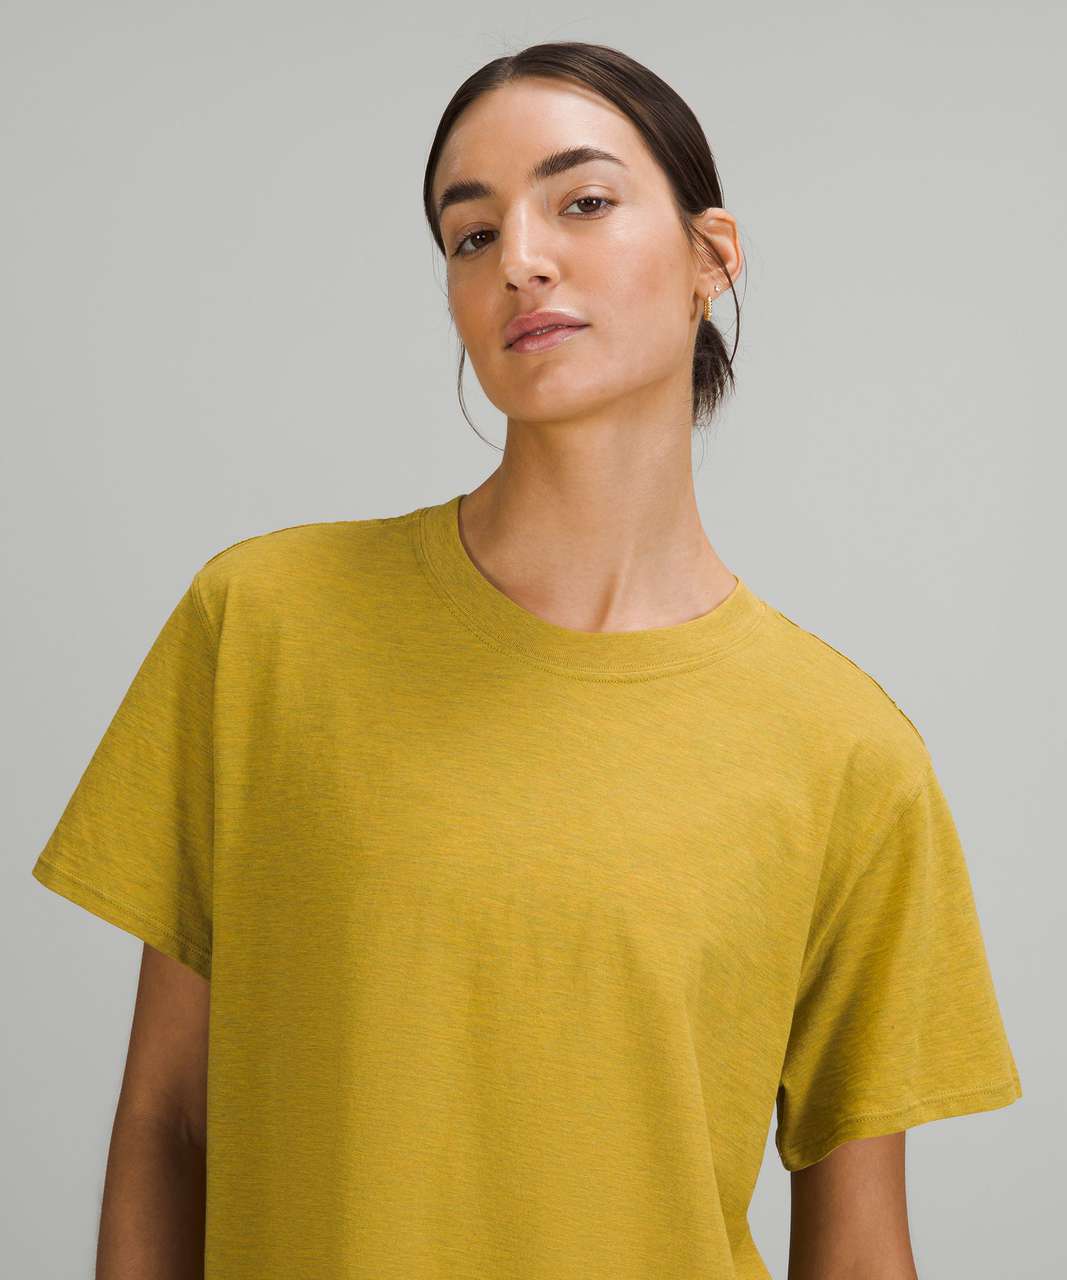 Lululemon All Yours Cotton T-Shirt - Heathered Auric Gold